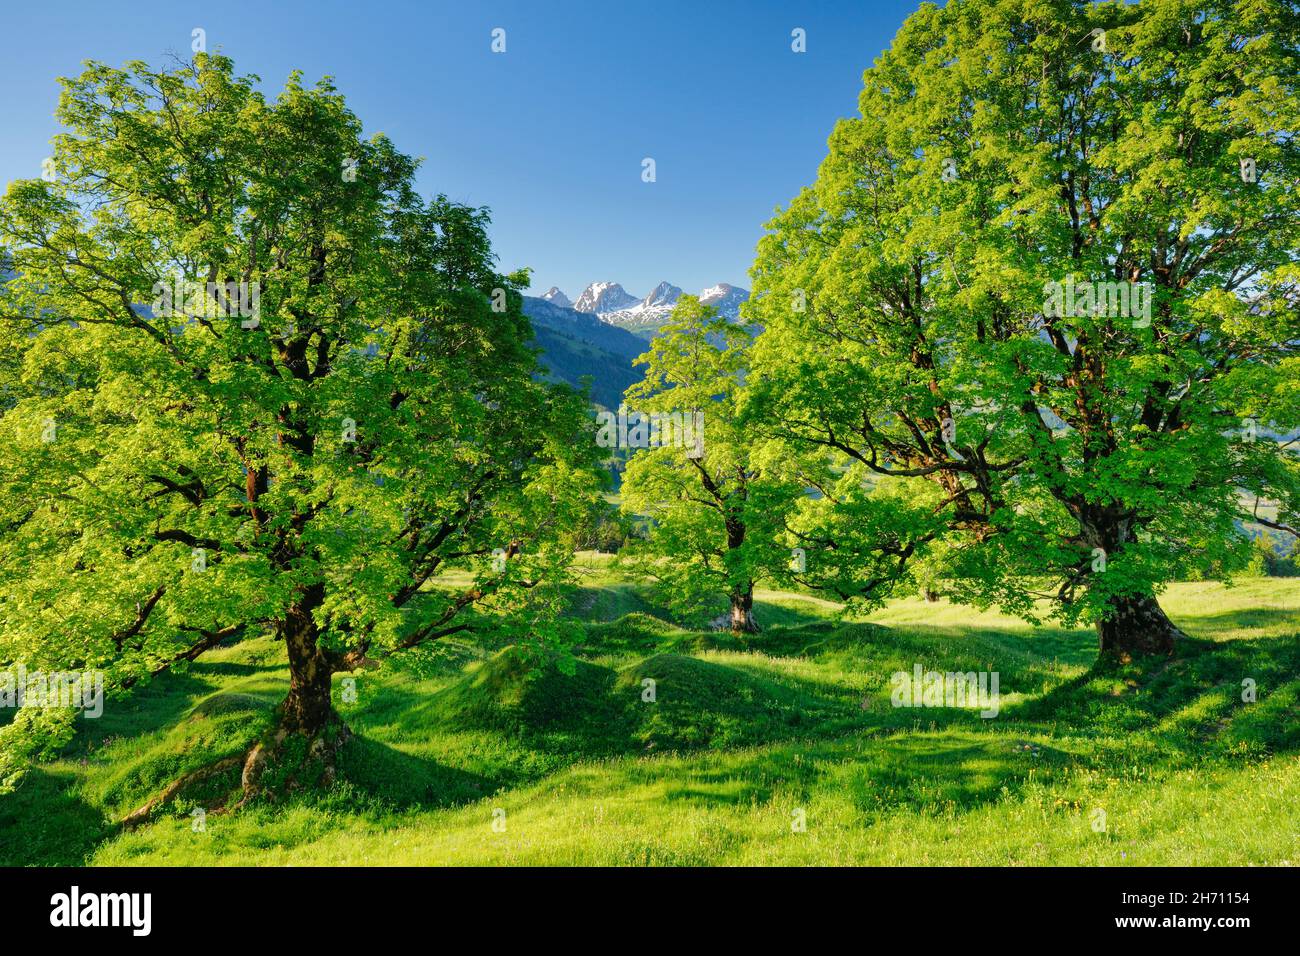 Sycamore maple (Acer pseudoplatanus). Grove in springtime with snow-capped Churfirsten in the background, near Ennetbuehl in Toggenburg, Canton of St. Gallen, Switzerland Stock Photo